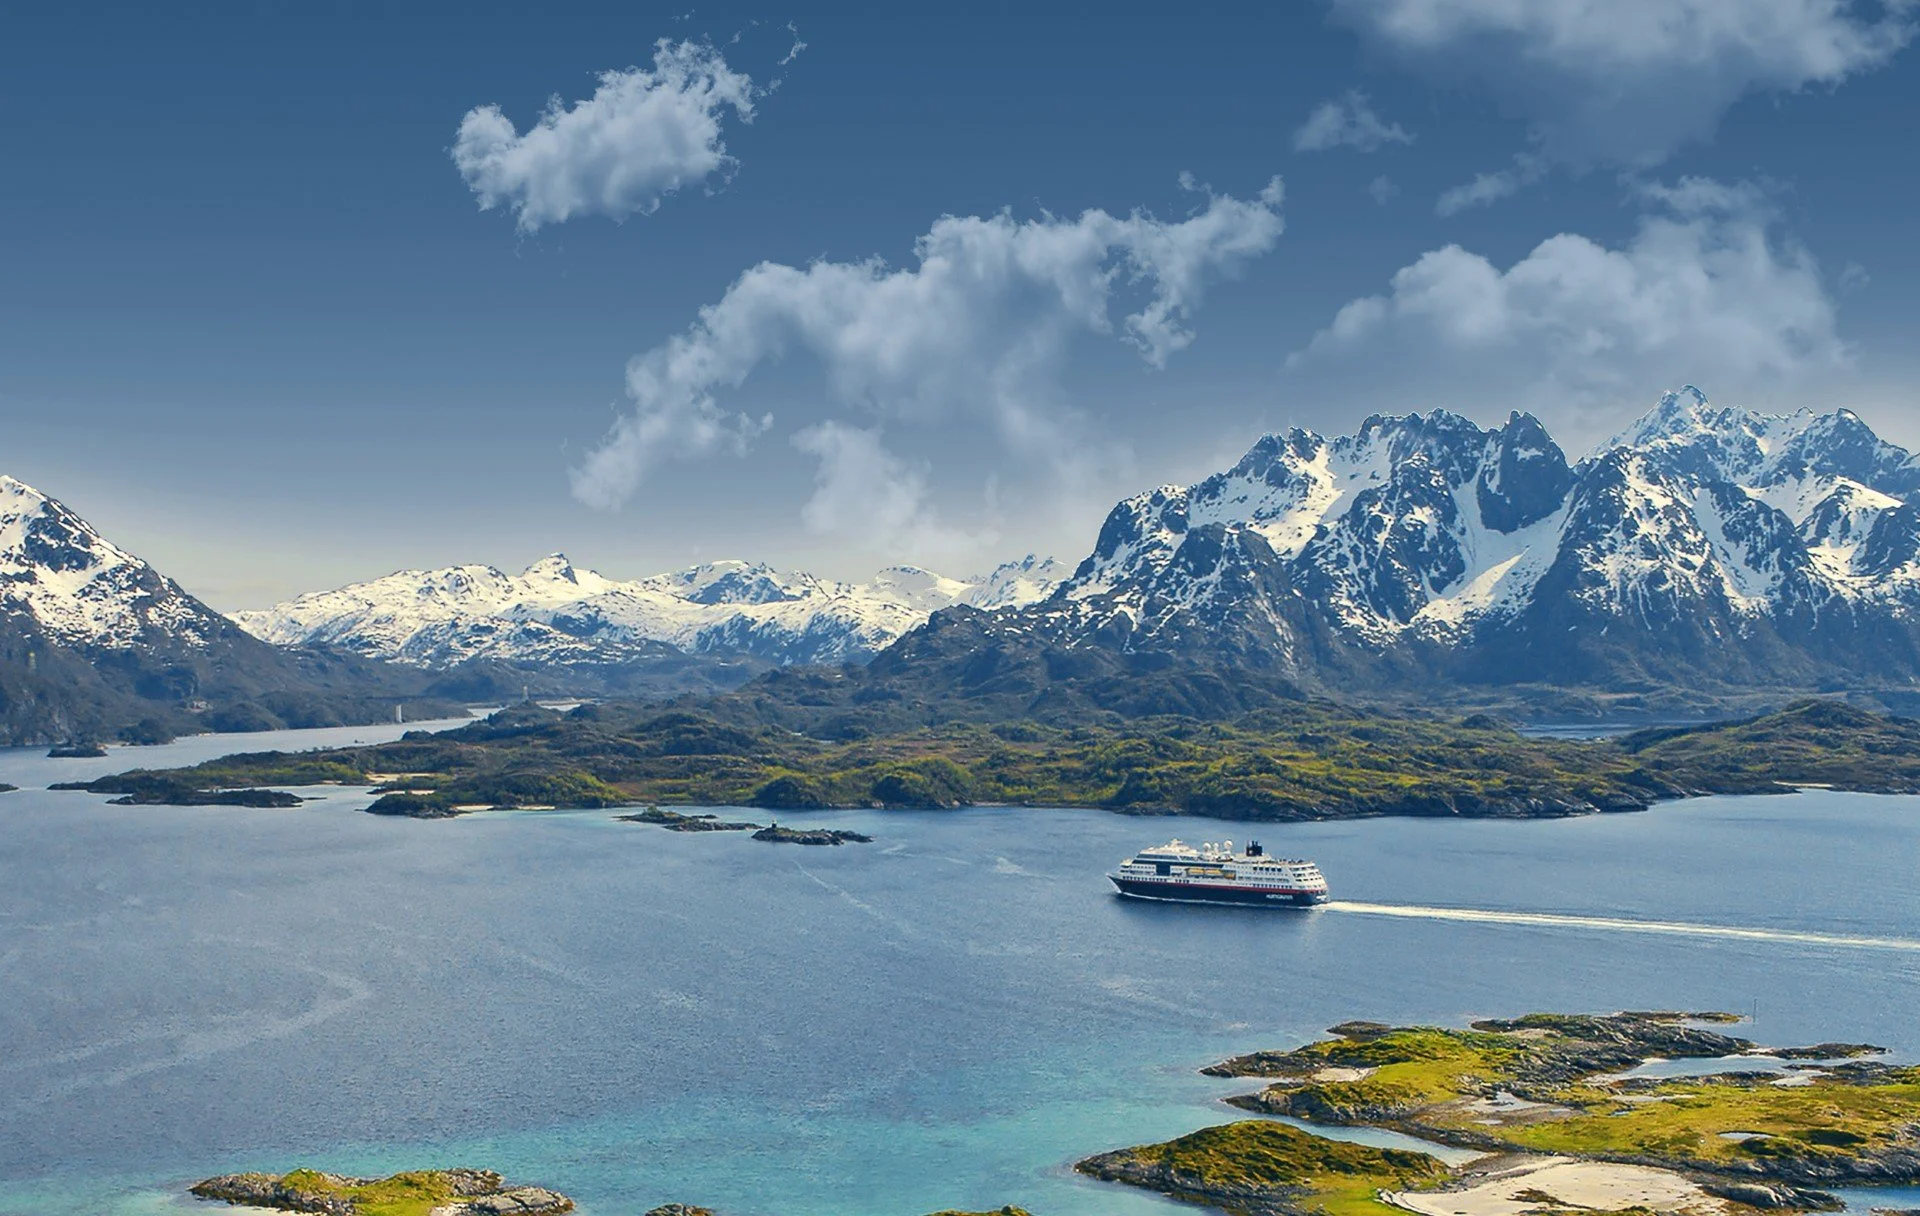 Hurtigruten Norway ship sailing in Raftsundet, Northern Norway. The water is turquoise and the peaks are covered in snow